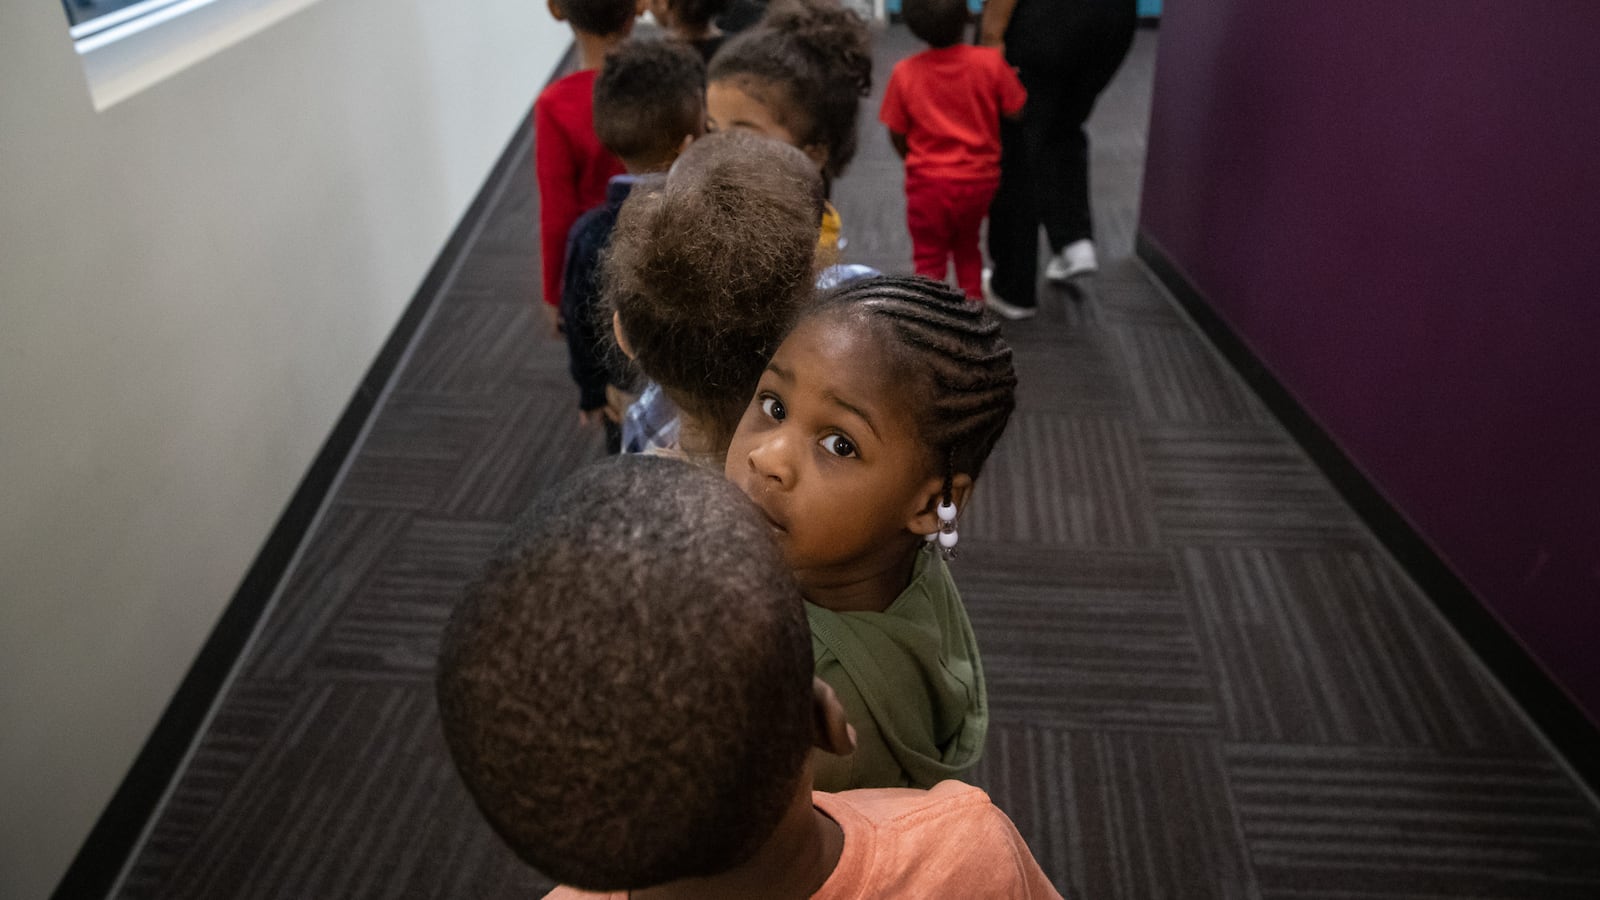 Preschool programs in Detroit have some of the strictest quality standards in the country.